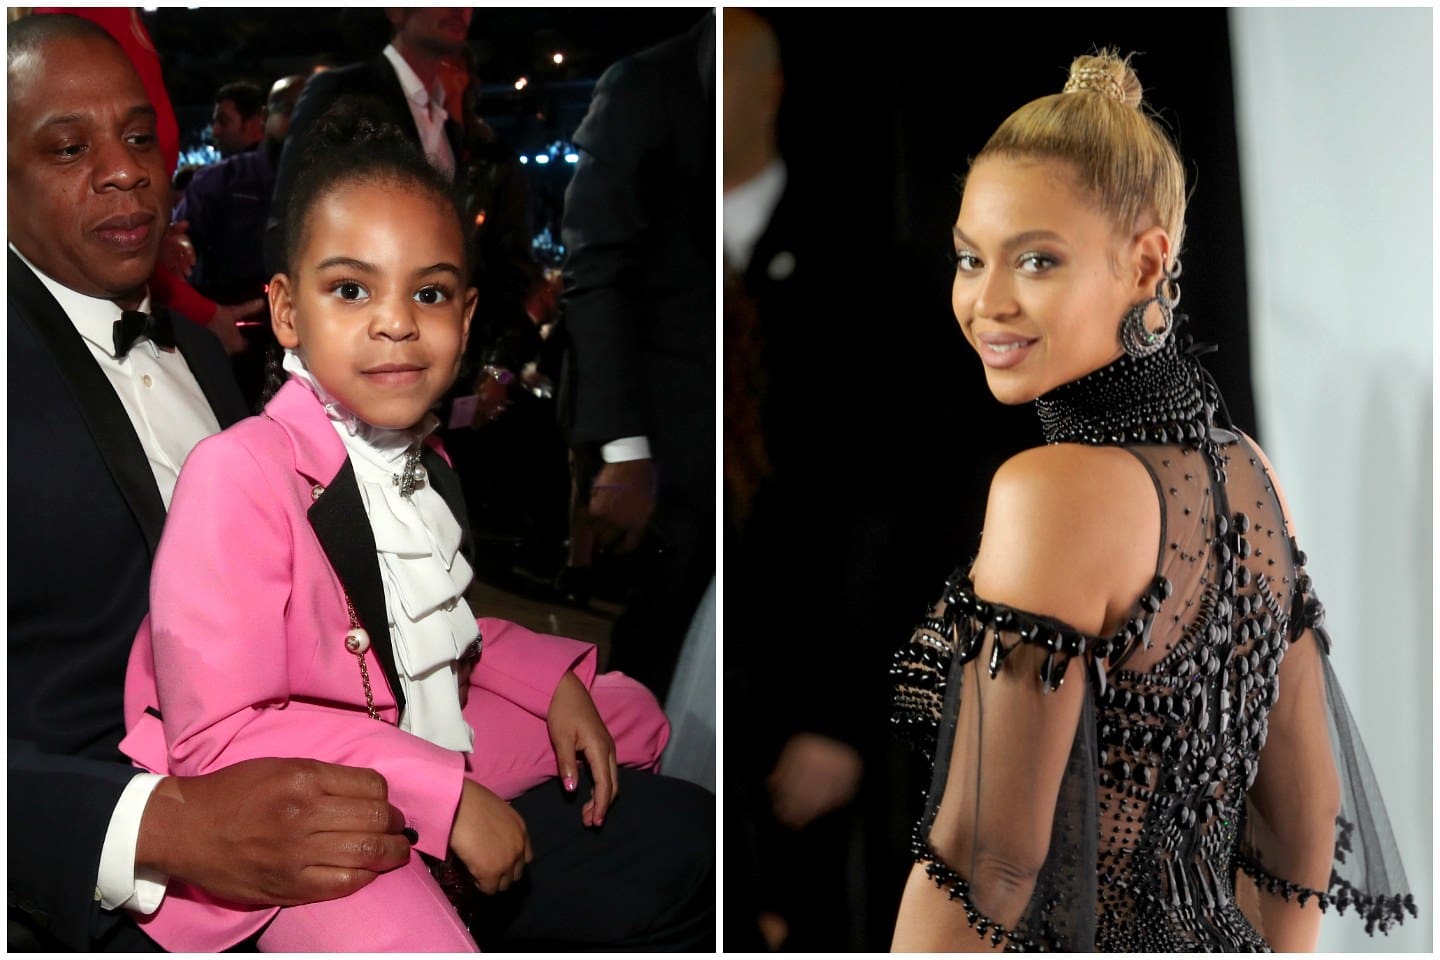 Beyonce Shocked By How Similar She And Daughter Blue Ivy Look In Side-By-Side Pictures ...